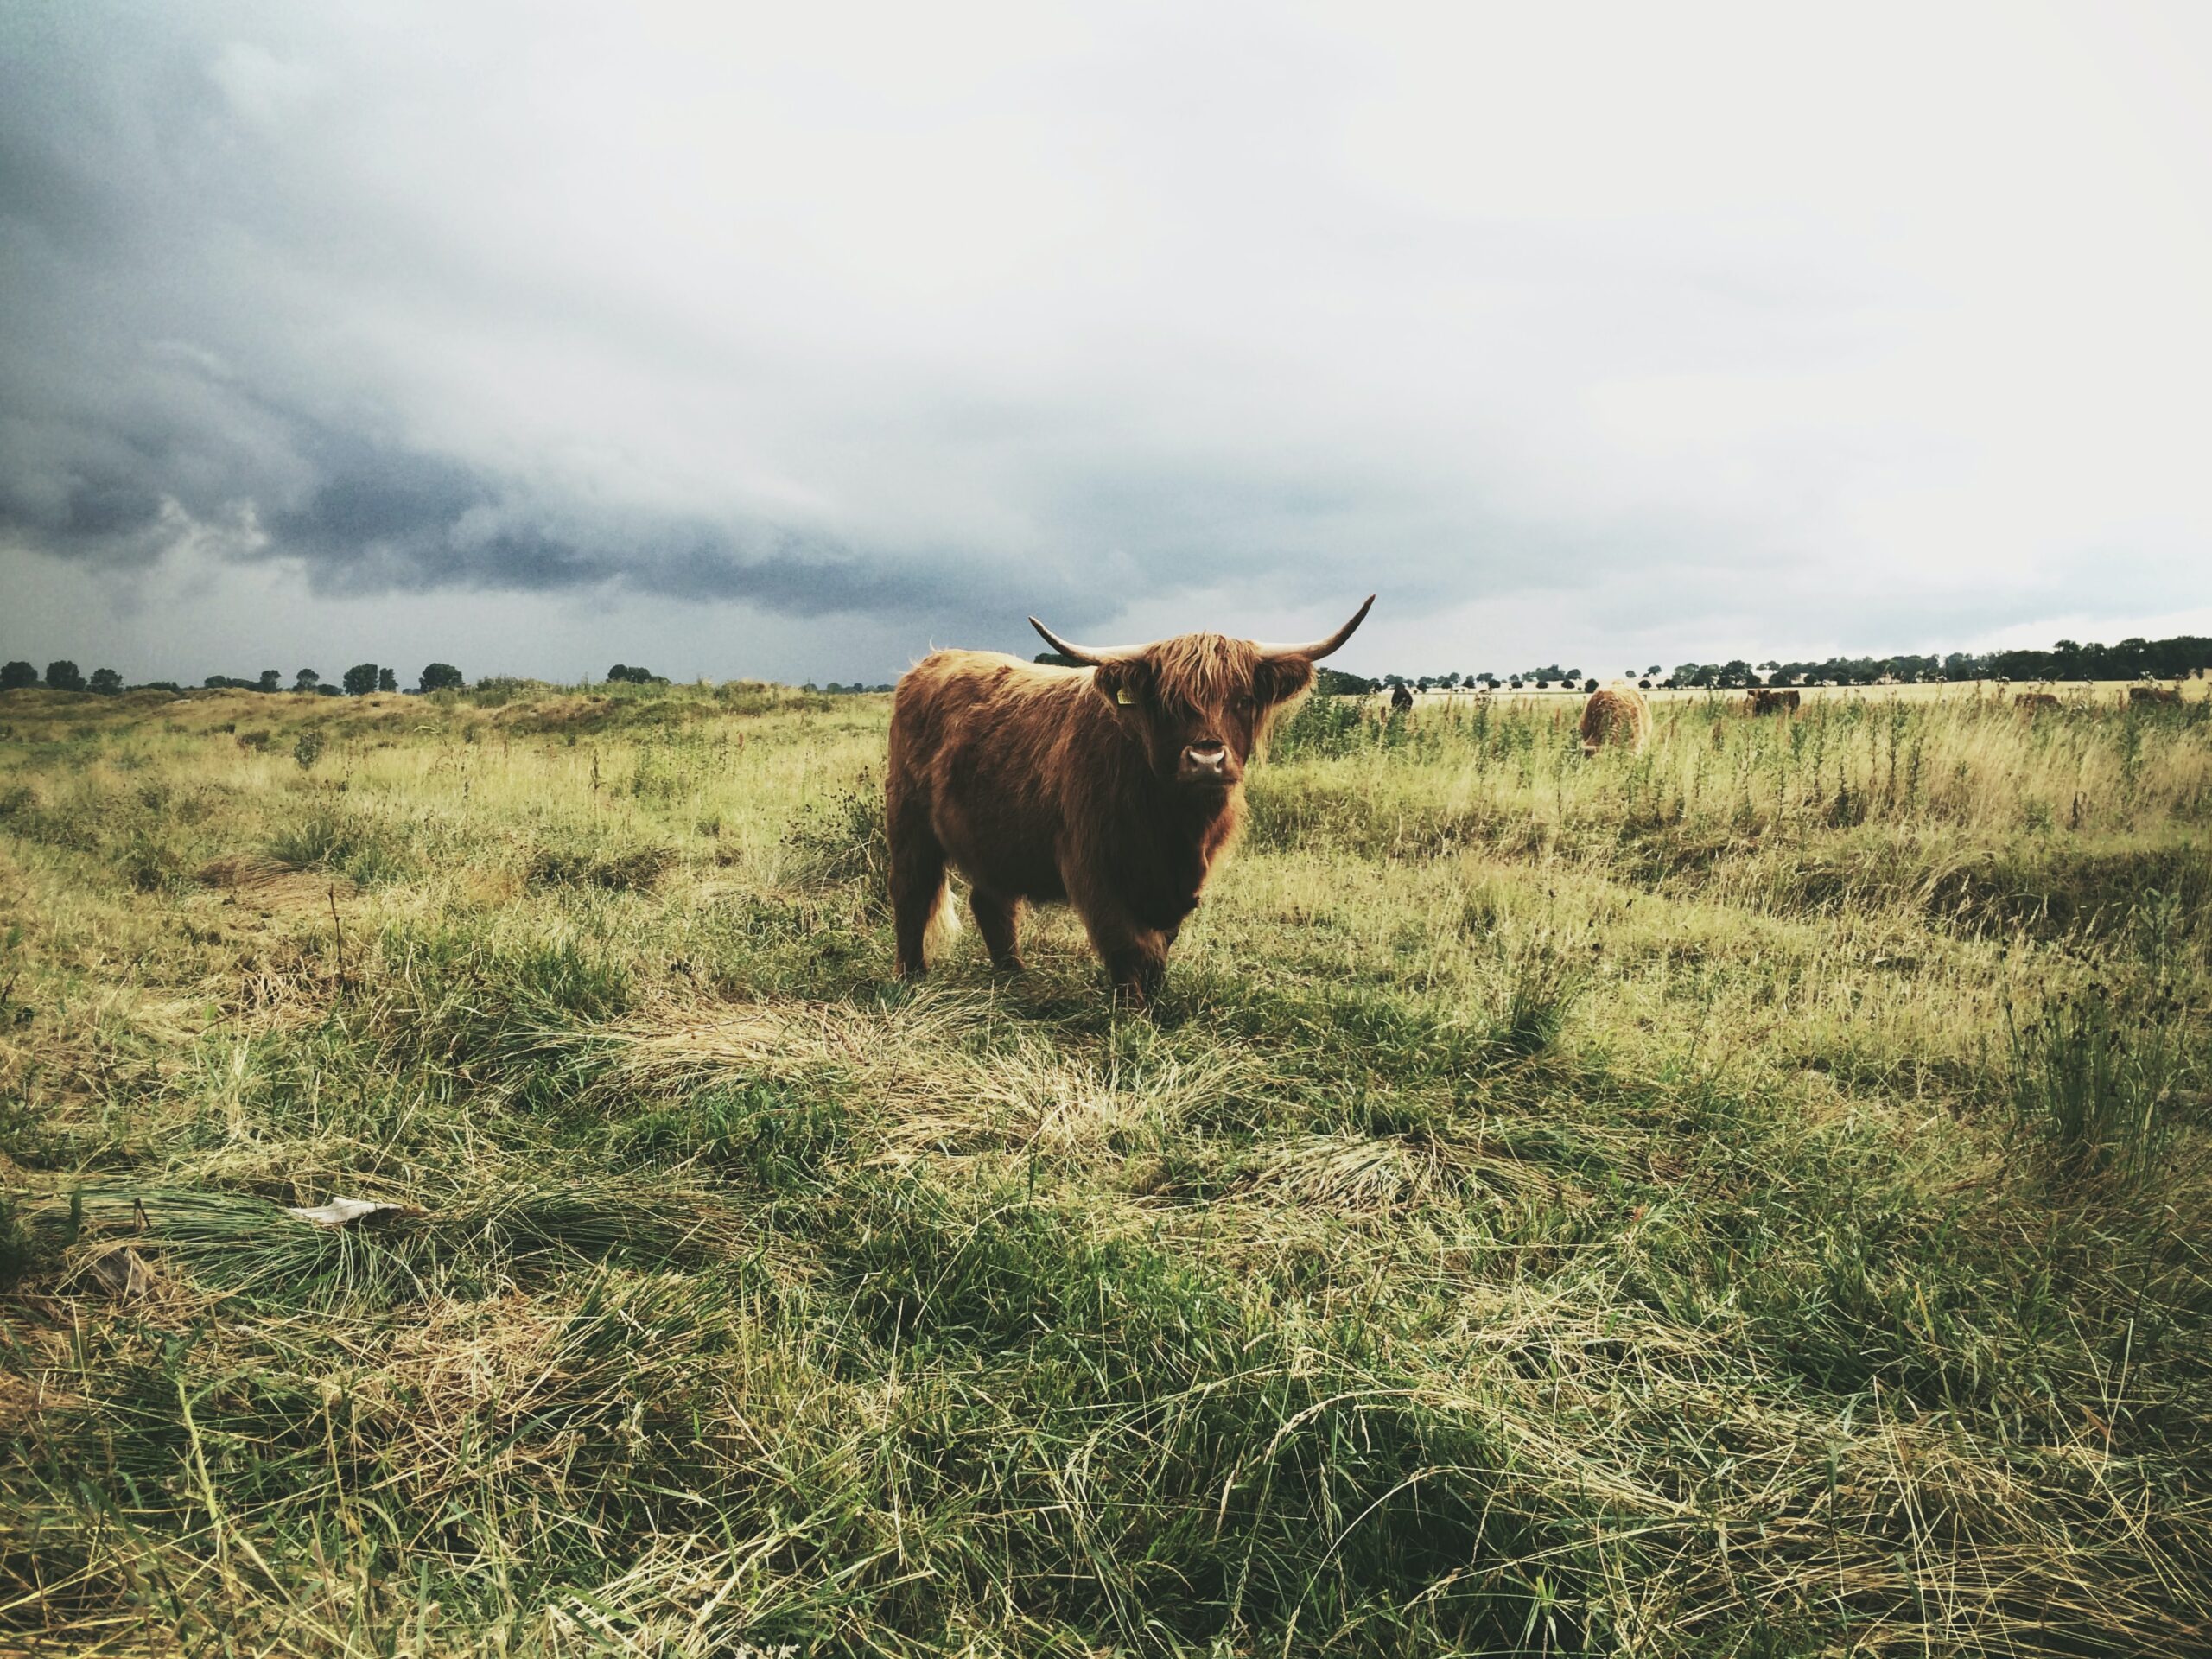 Image of a bison in a field with stepped on grasses and dirt under a cloudy sky.